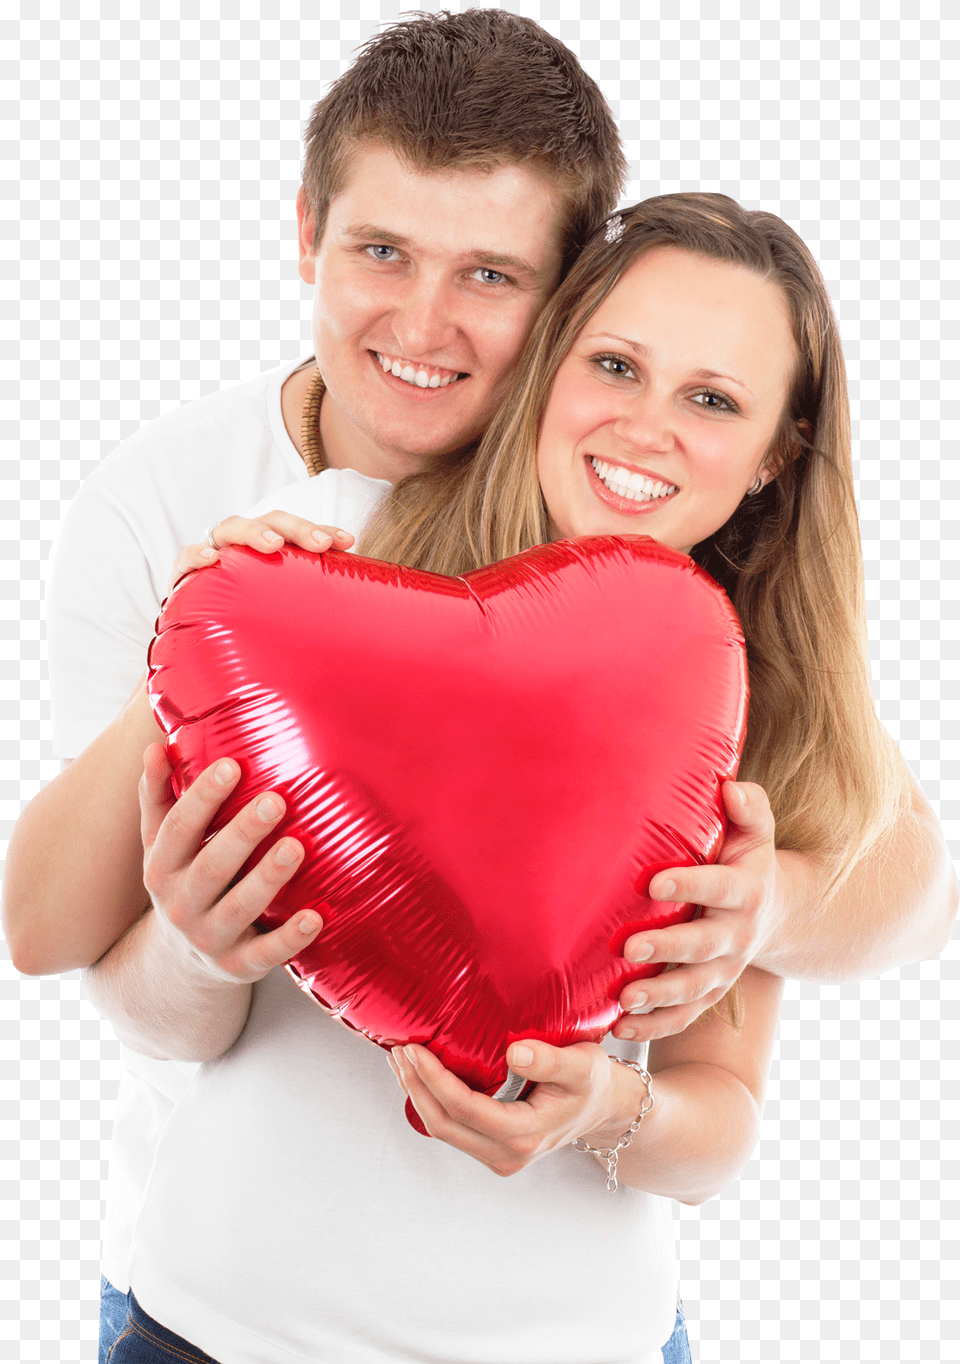 Young Couple Holding A Red Heart Pillow Image Pngpix Couple In Love, Adult, Female, Person, Woman Free Png Download